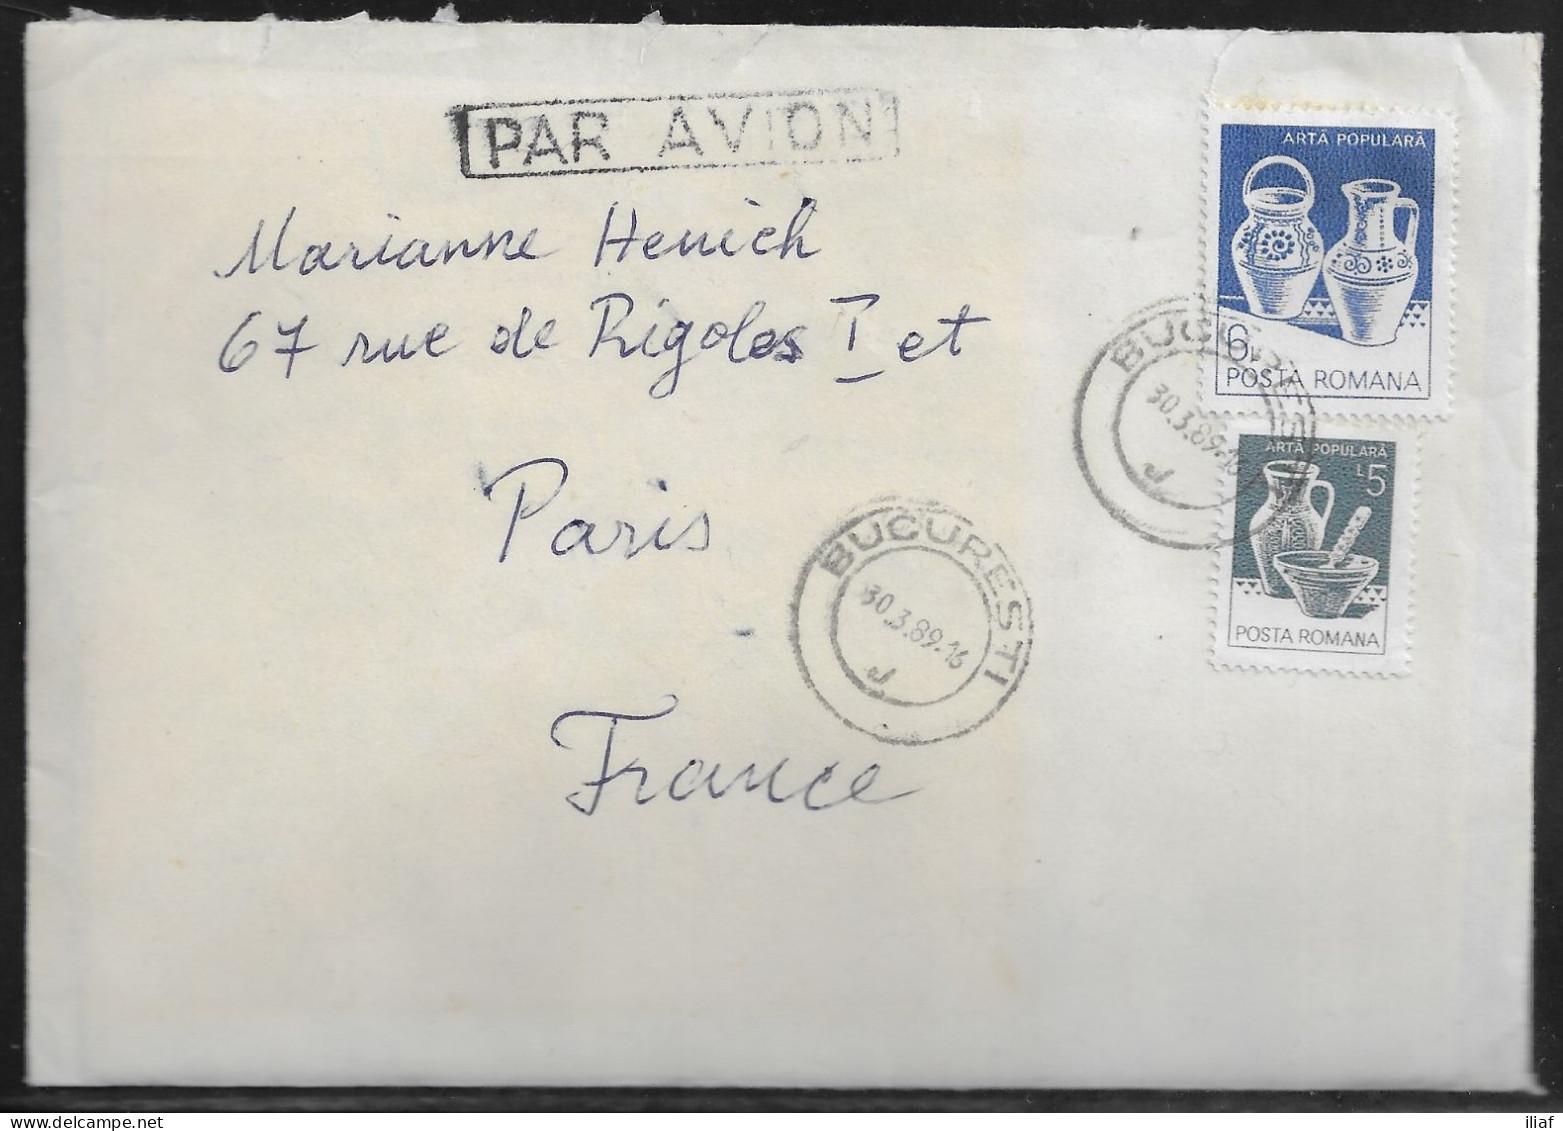 Romania. Stamps Sc. 3109-3110 On Air Mail Letter, Sent From Bucharest On 30.03.1989 To France. Letter Inside - Brieven En Documenten